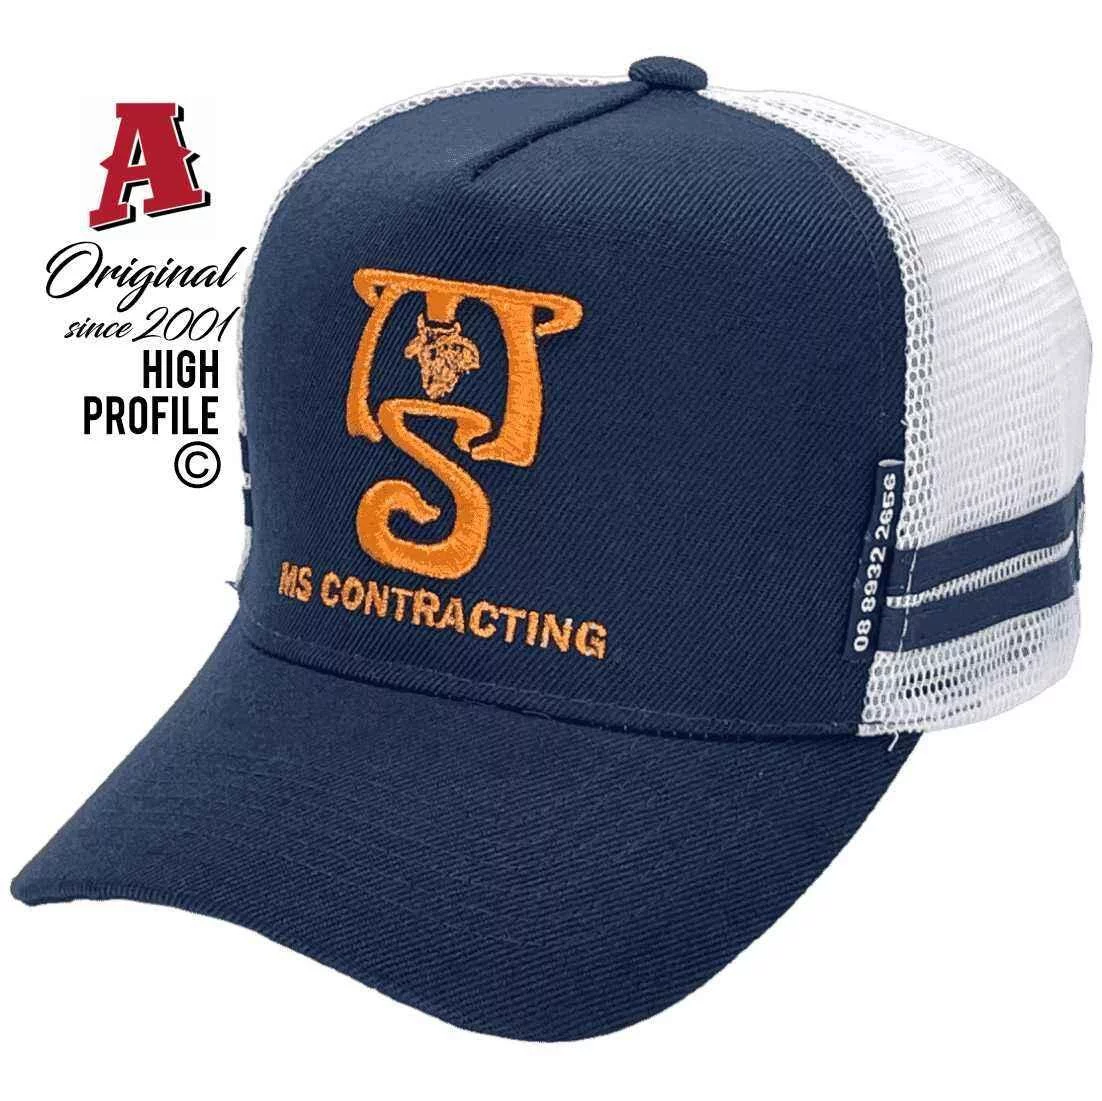 MS Contracting Humpty Doo NT Basic Aussie Trucker Hats with Australian HeadFit Crown & 2 SideBands Navy White Snapback